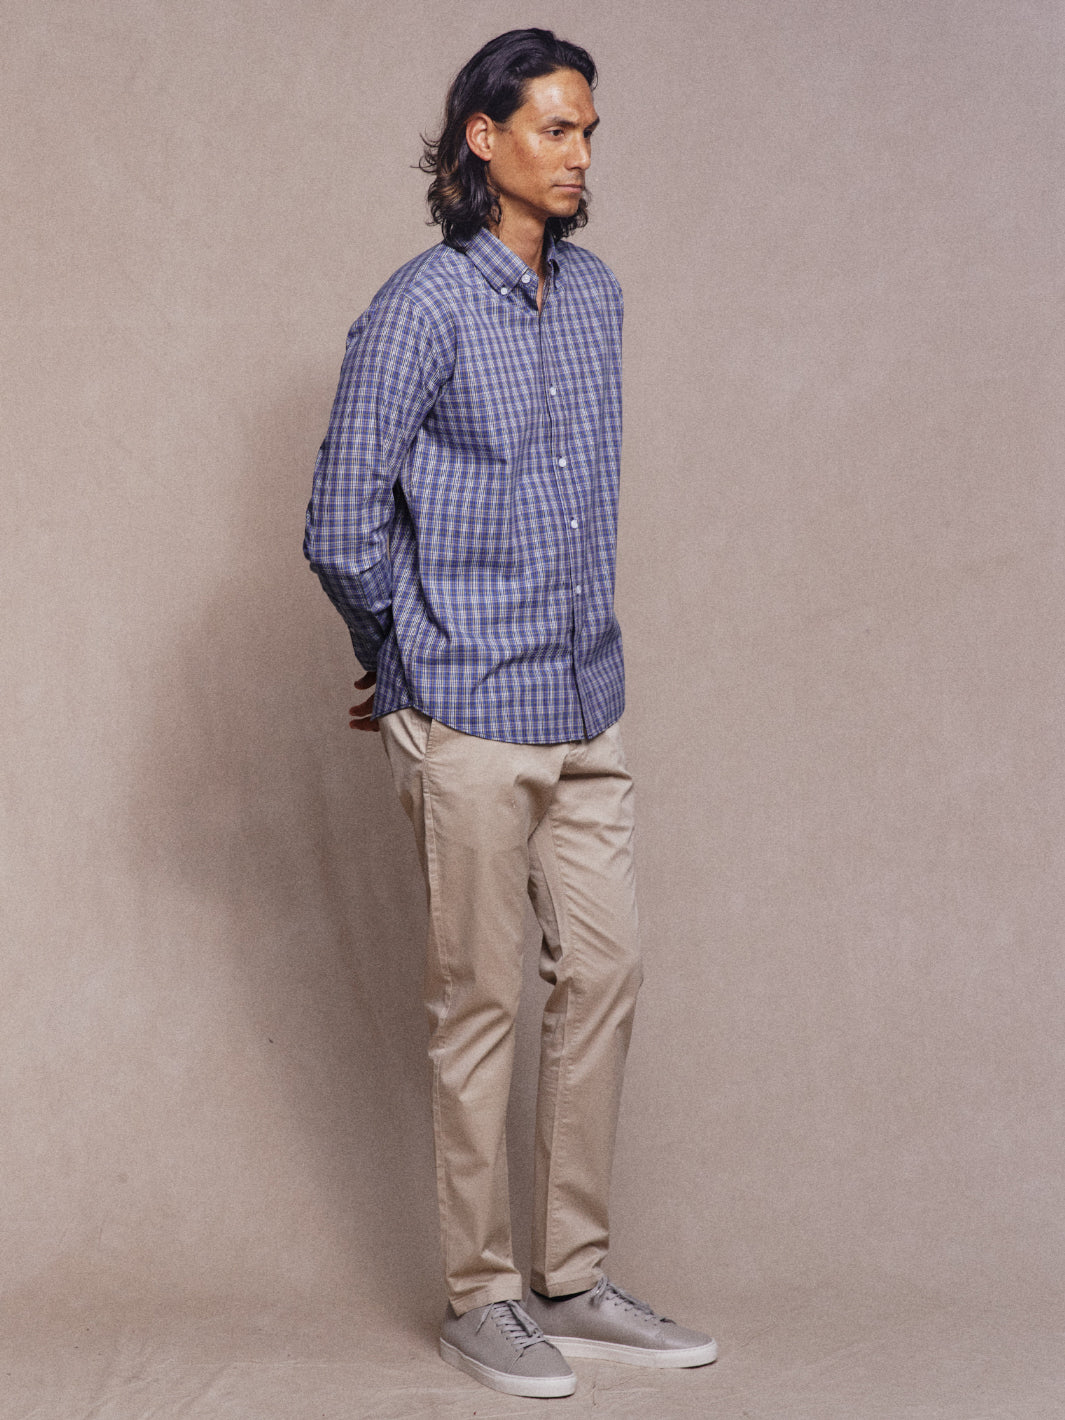 Model wearing Navy Check Light Cotton Button Down Shirt with tan chinos and grey sneakers